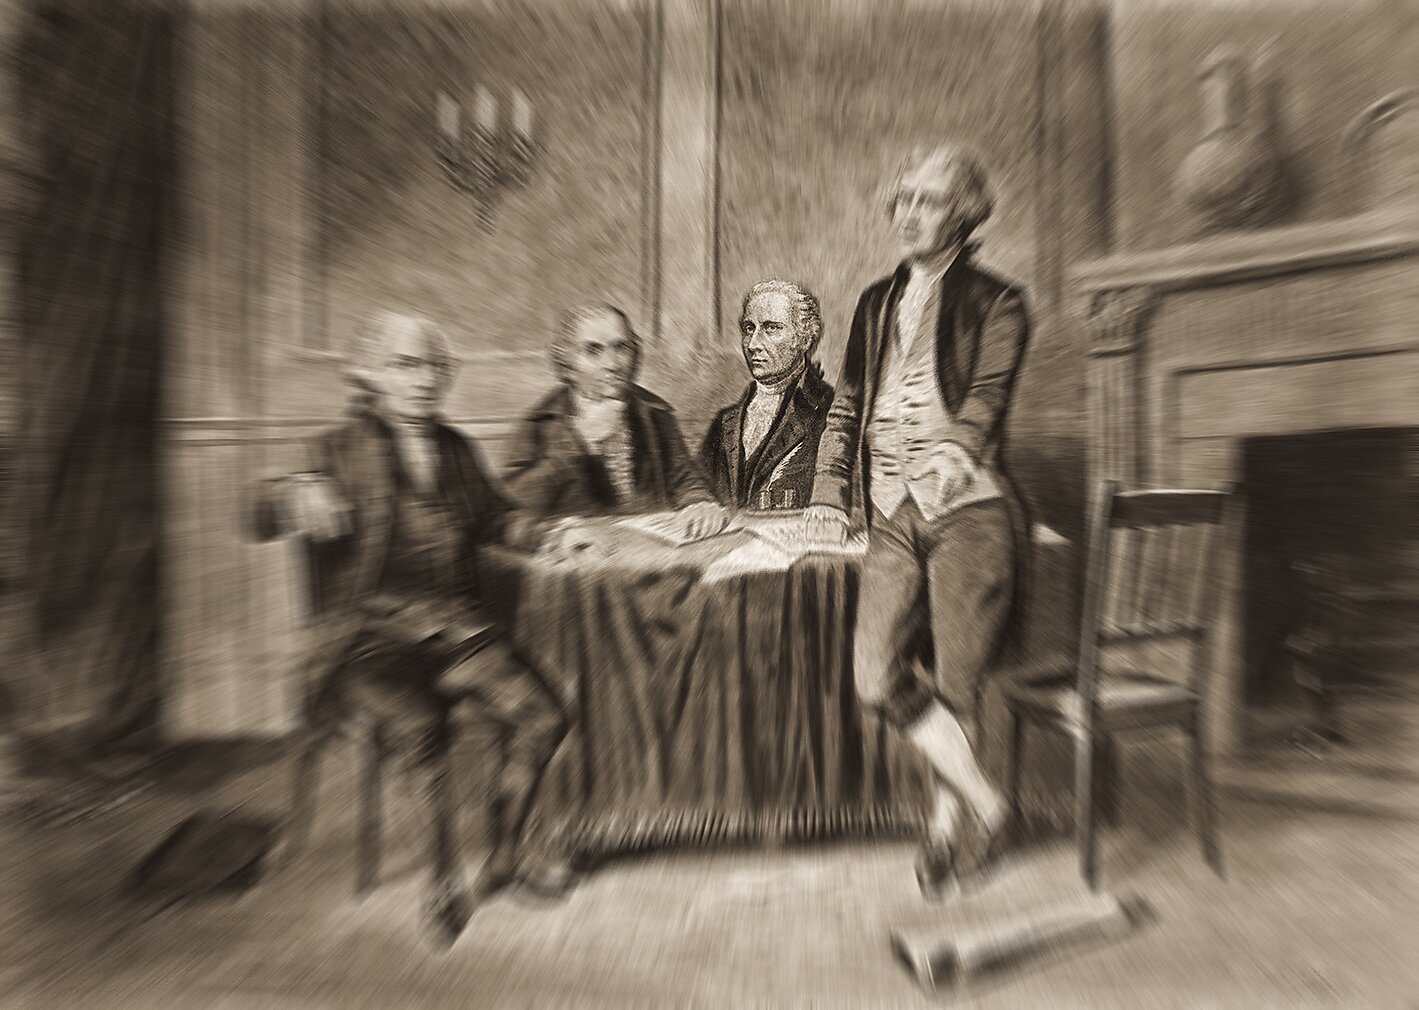 Blurred illustration of four Founding Fathers, with Hamilton in focus.